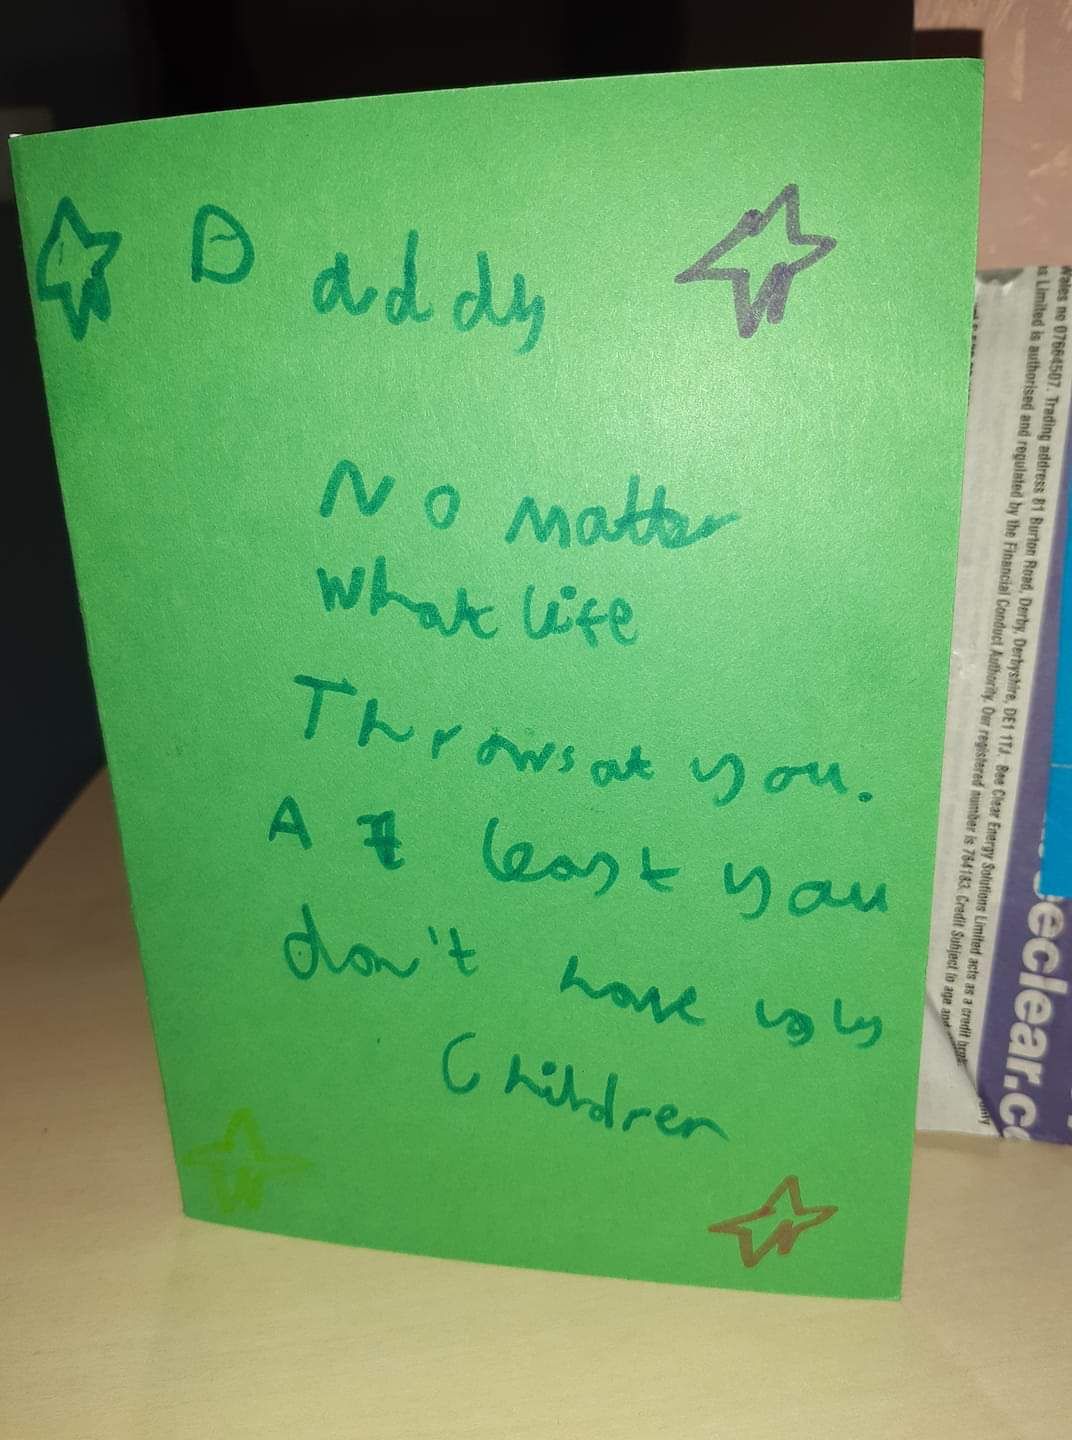 My dad showed me this card he got from my very modest little brother for Father's Day.